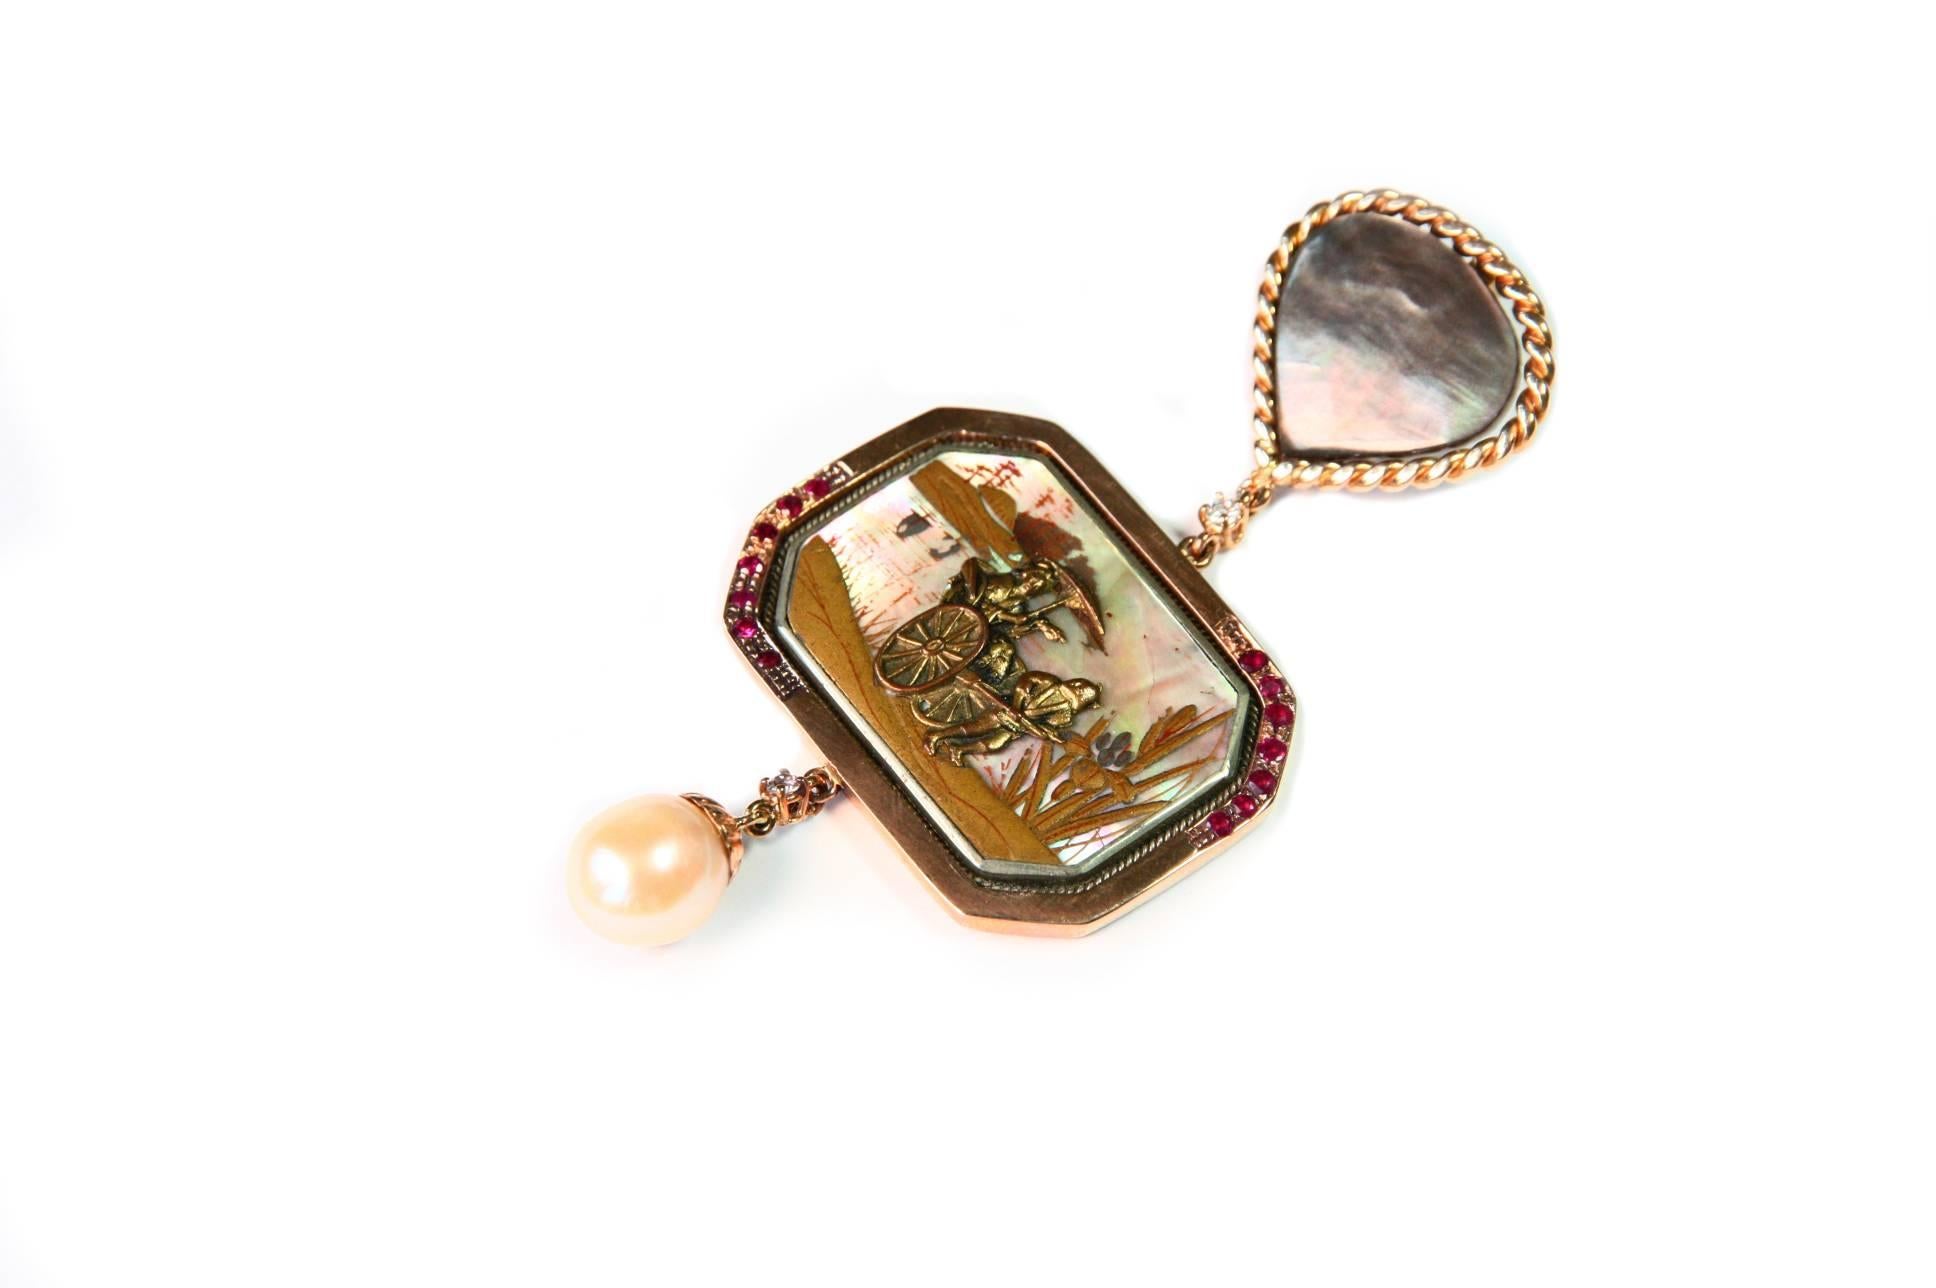 Fantastic pendant made with  antiques Japanese miniature on mother of pearl fine designed with japanies landscape and natural details of lake stage, a geisha figure under the umbrella, Fuji mountain on the back everything  on relief, ruby, 18kt rose